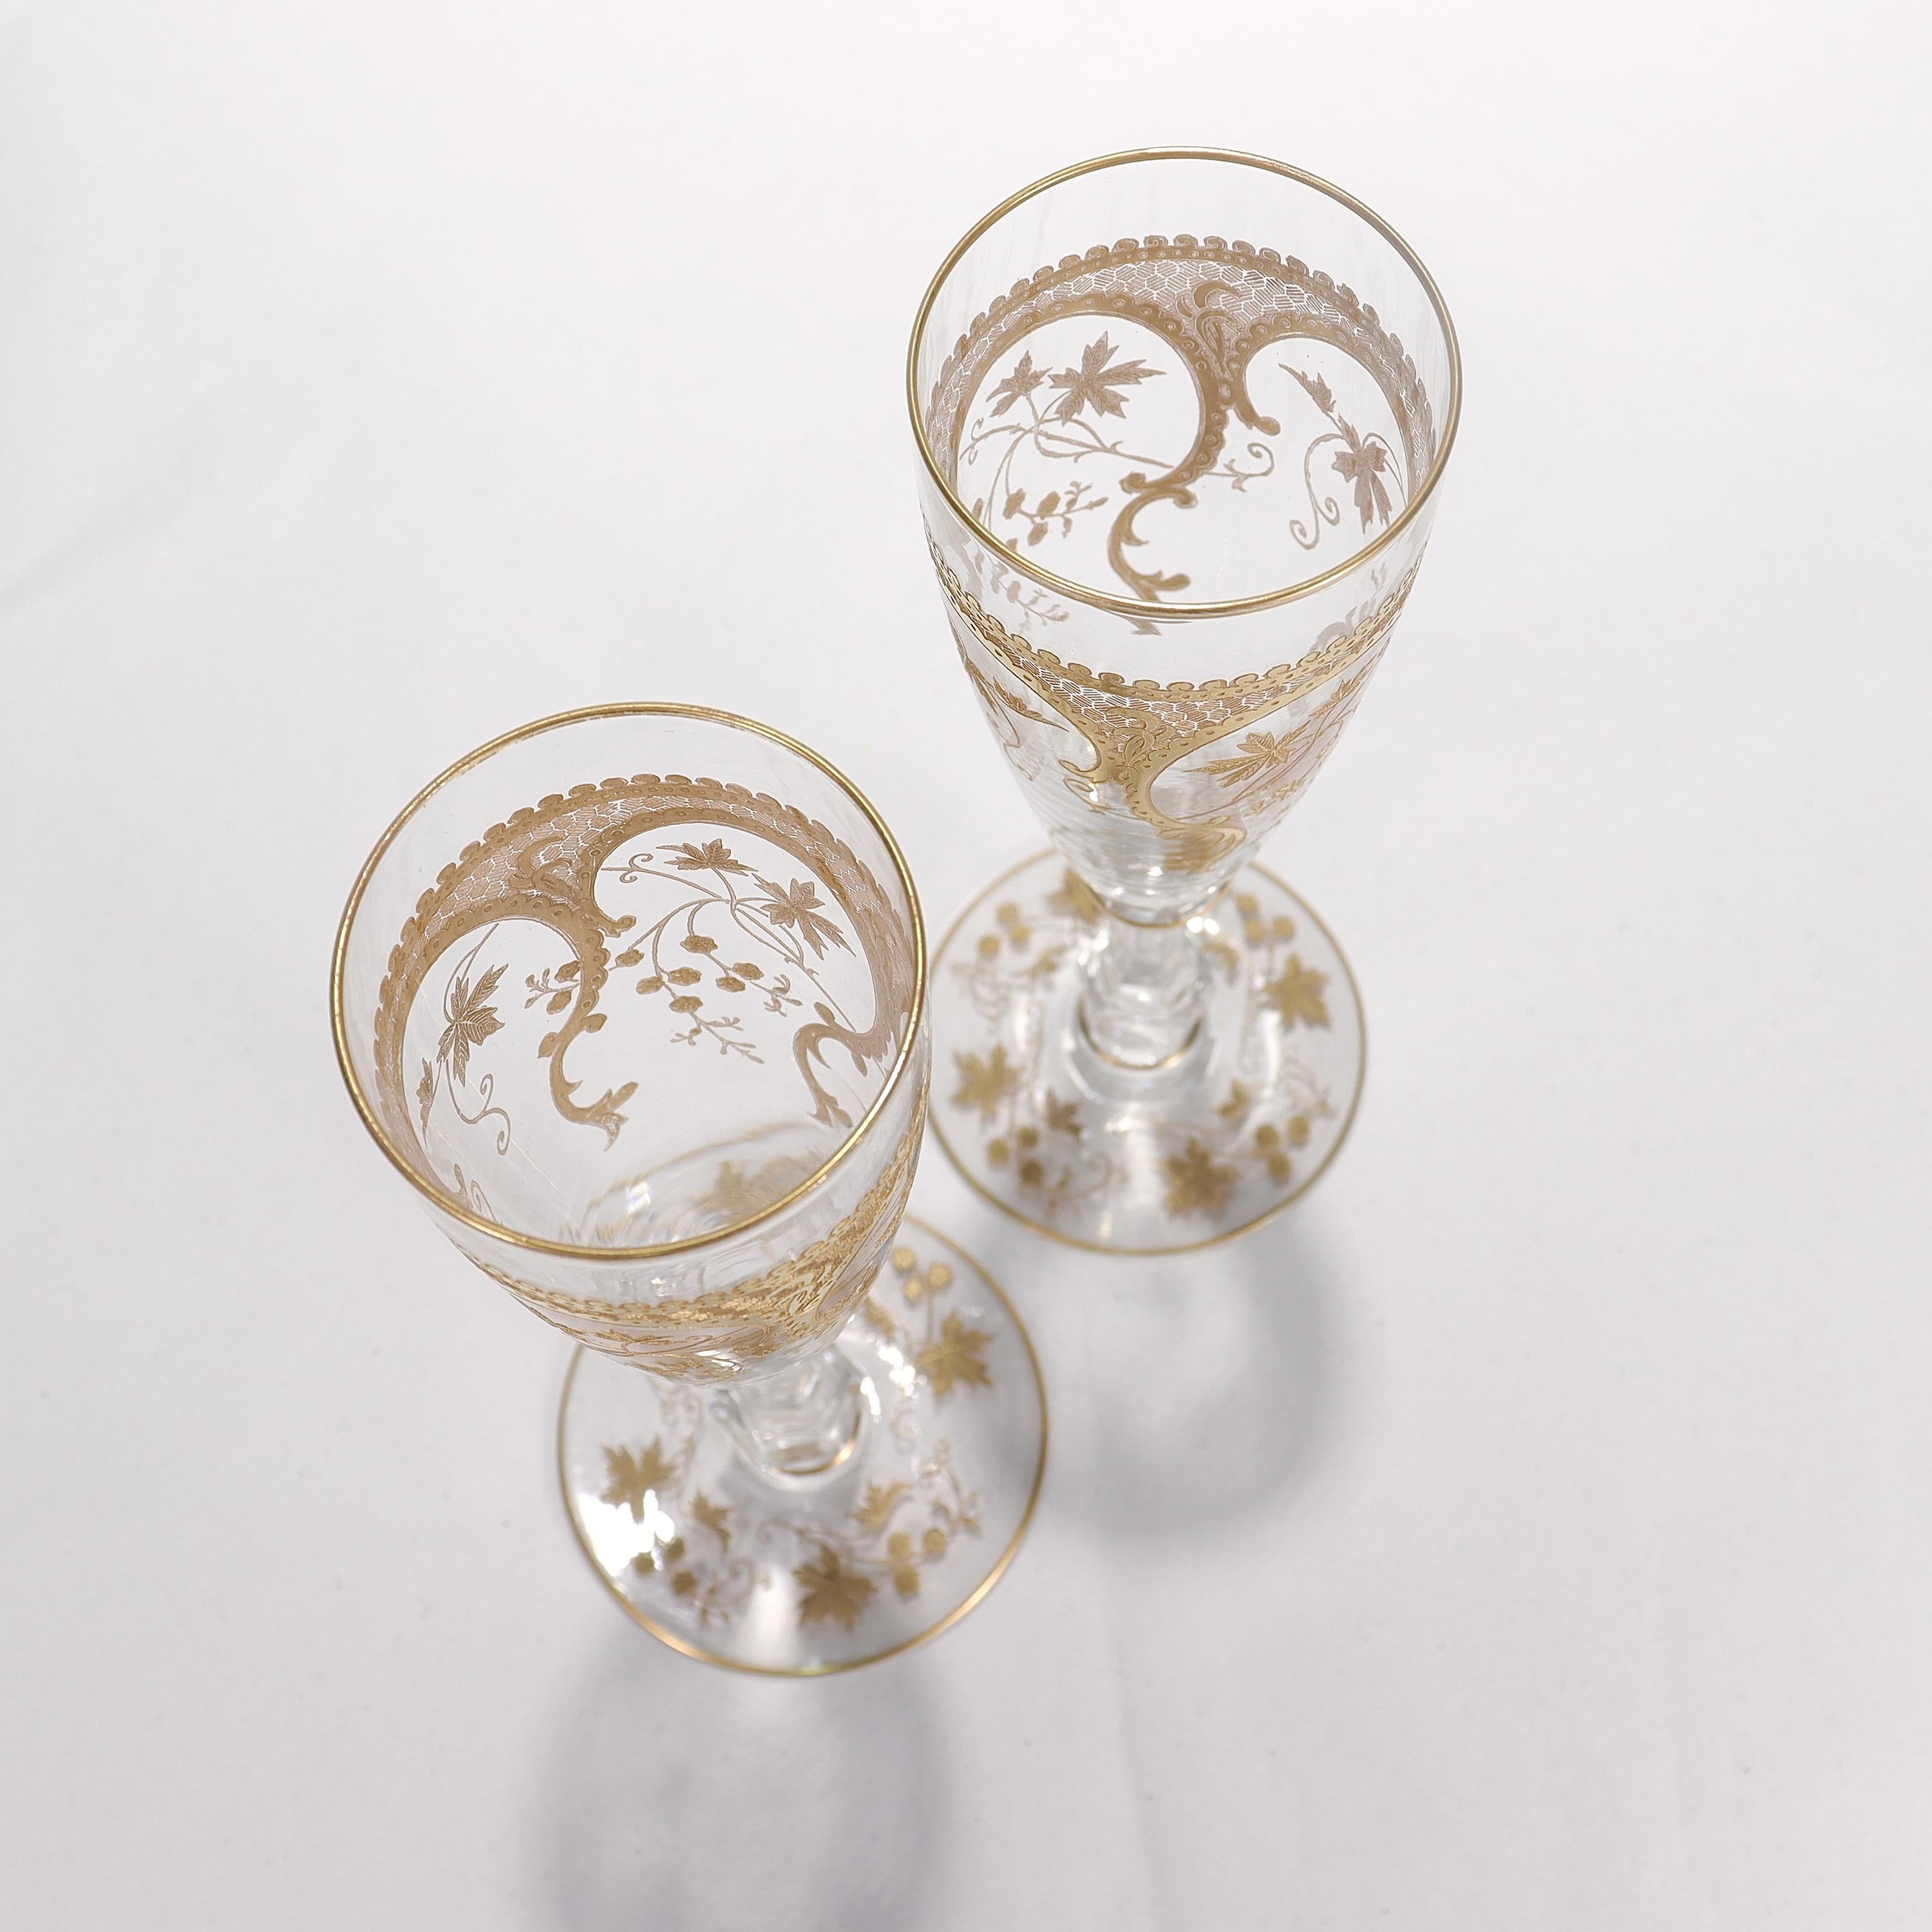 Pair of Richly Gilt Antique Etched & Cut Glass Champagne Stems or Flutes  1